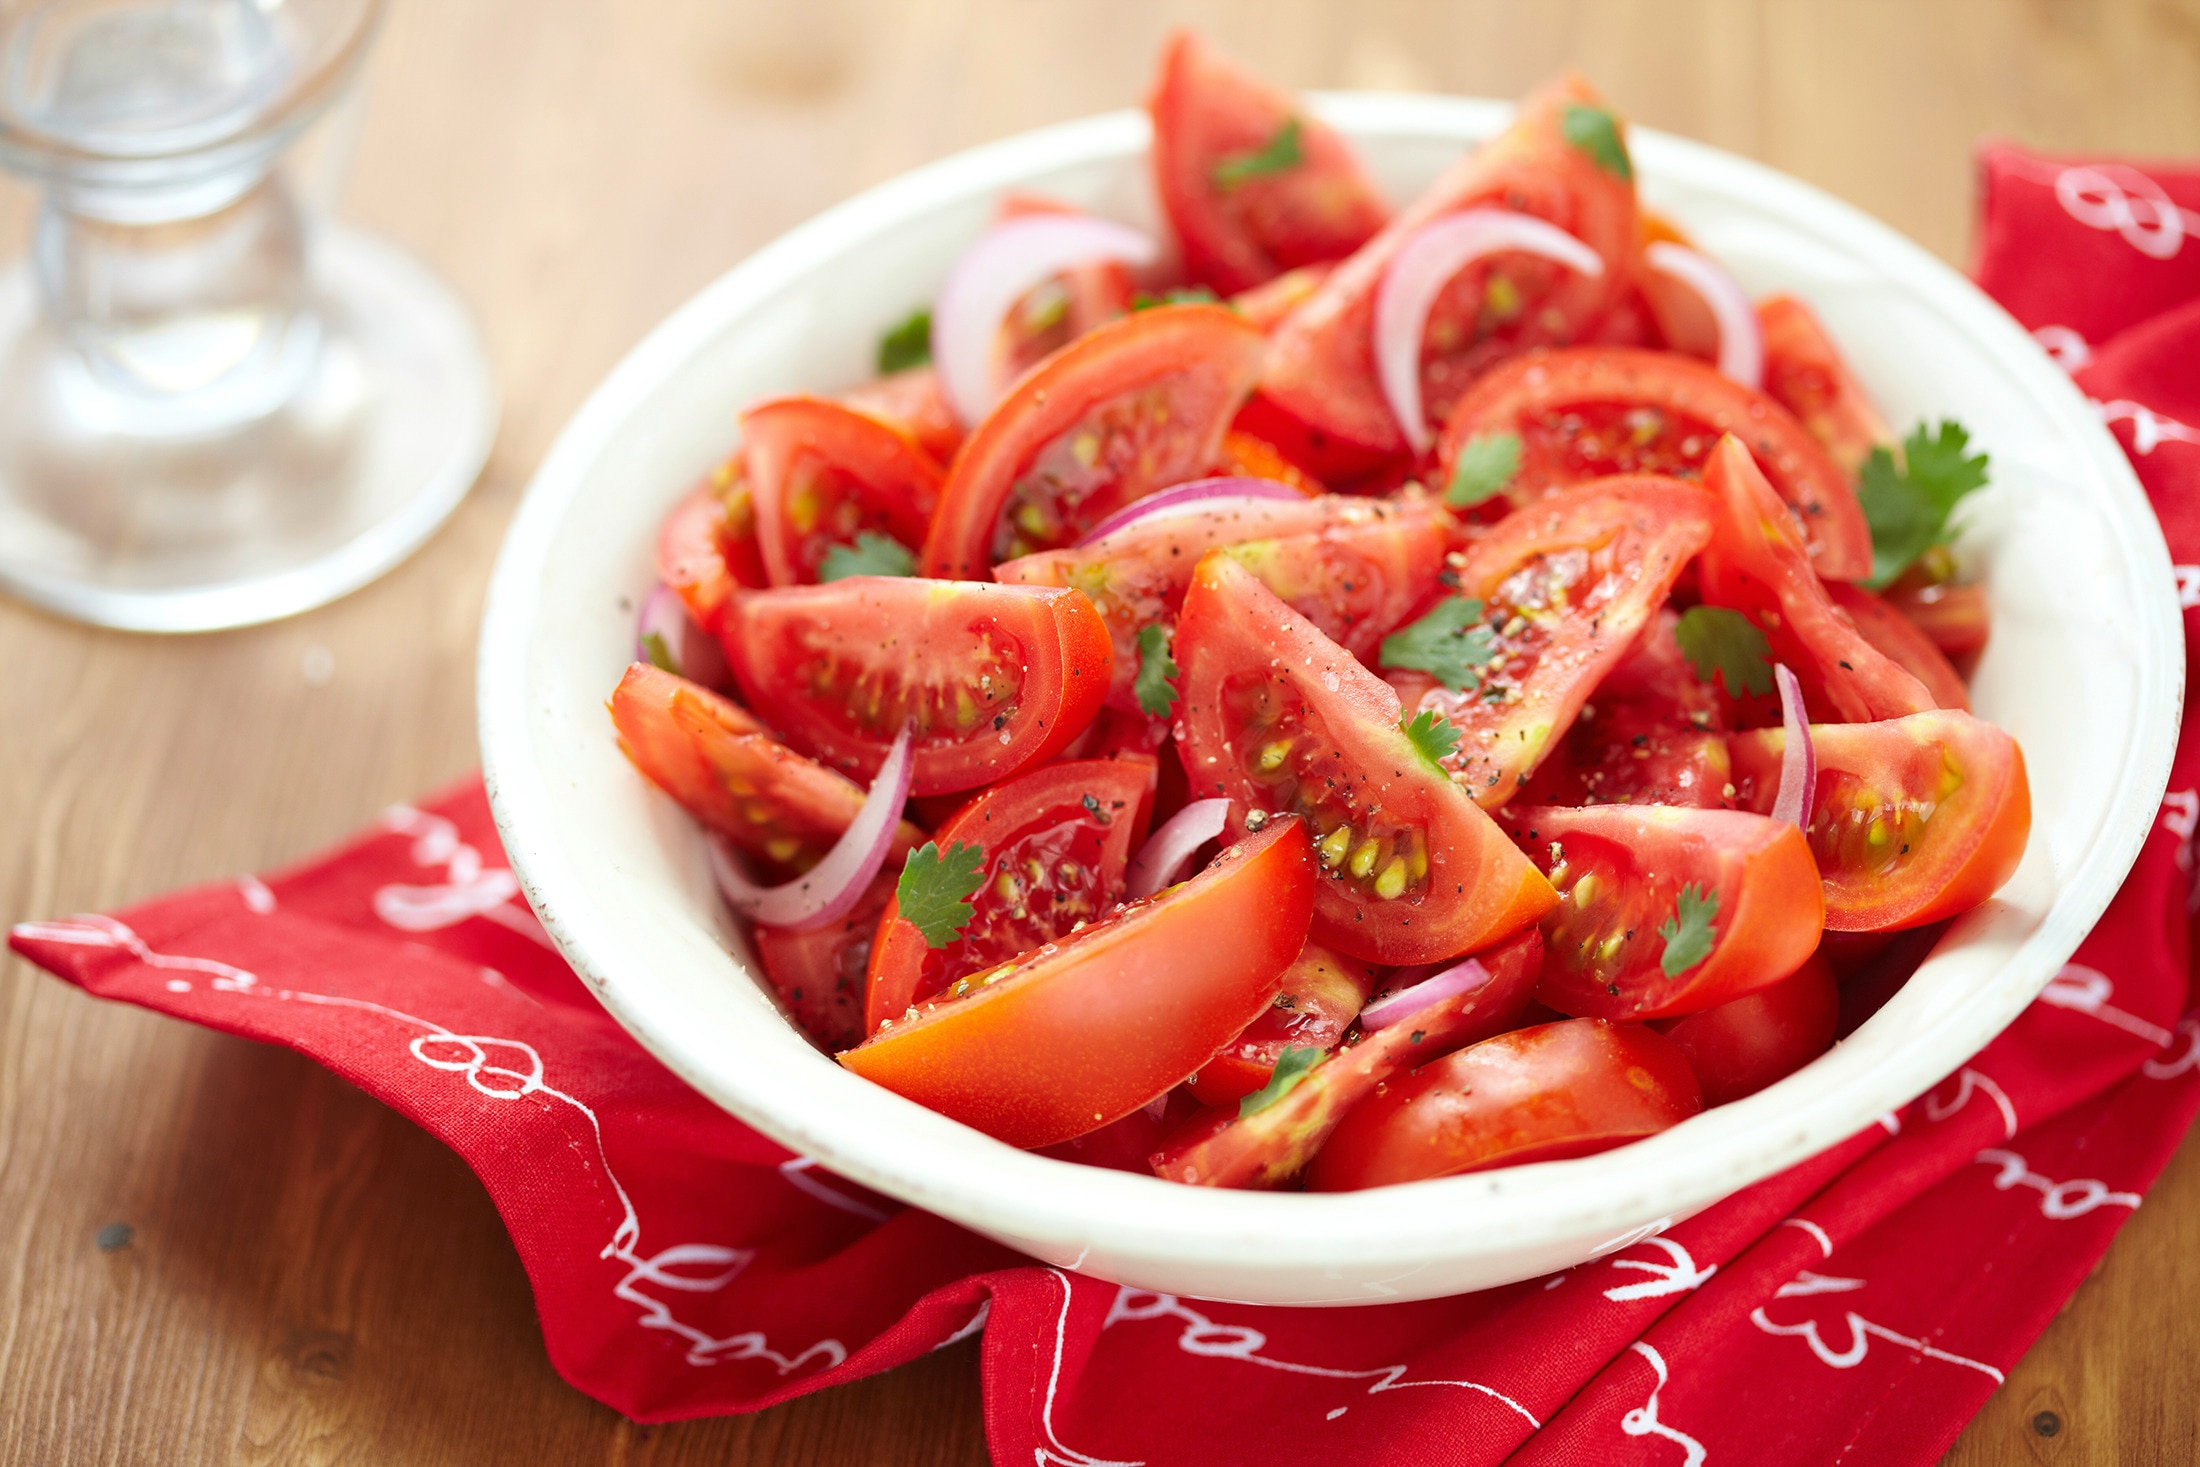 A bowl of tomato wedges with sliced red onions